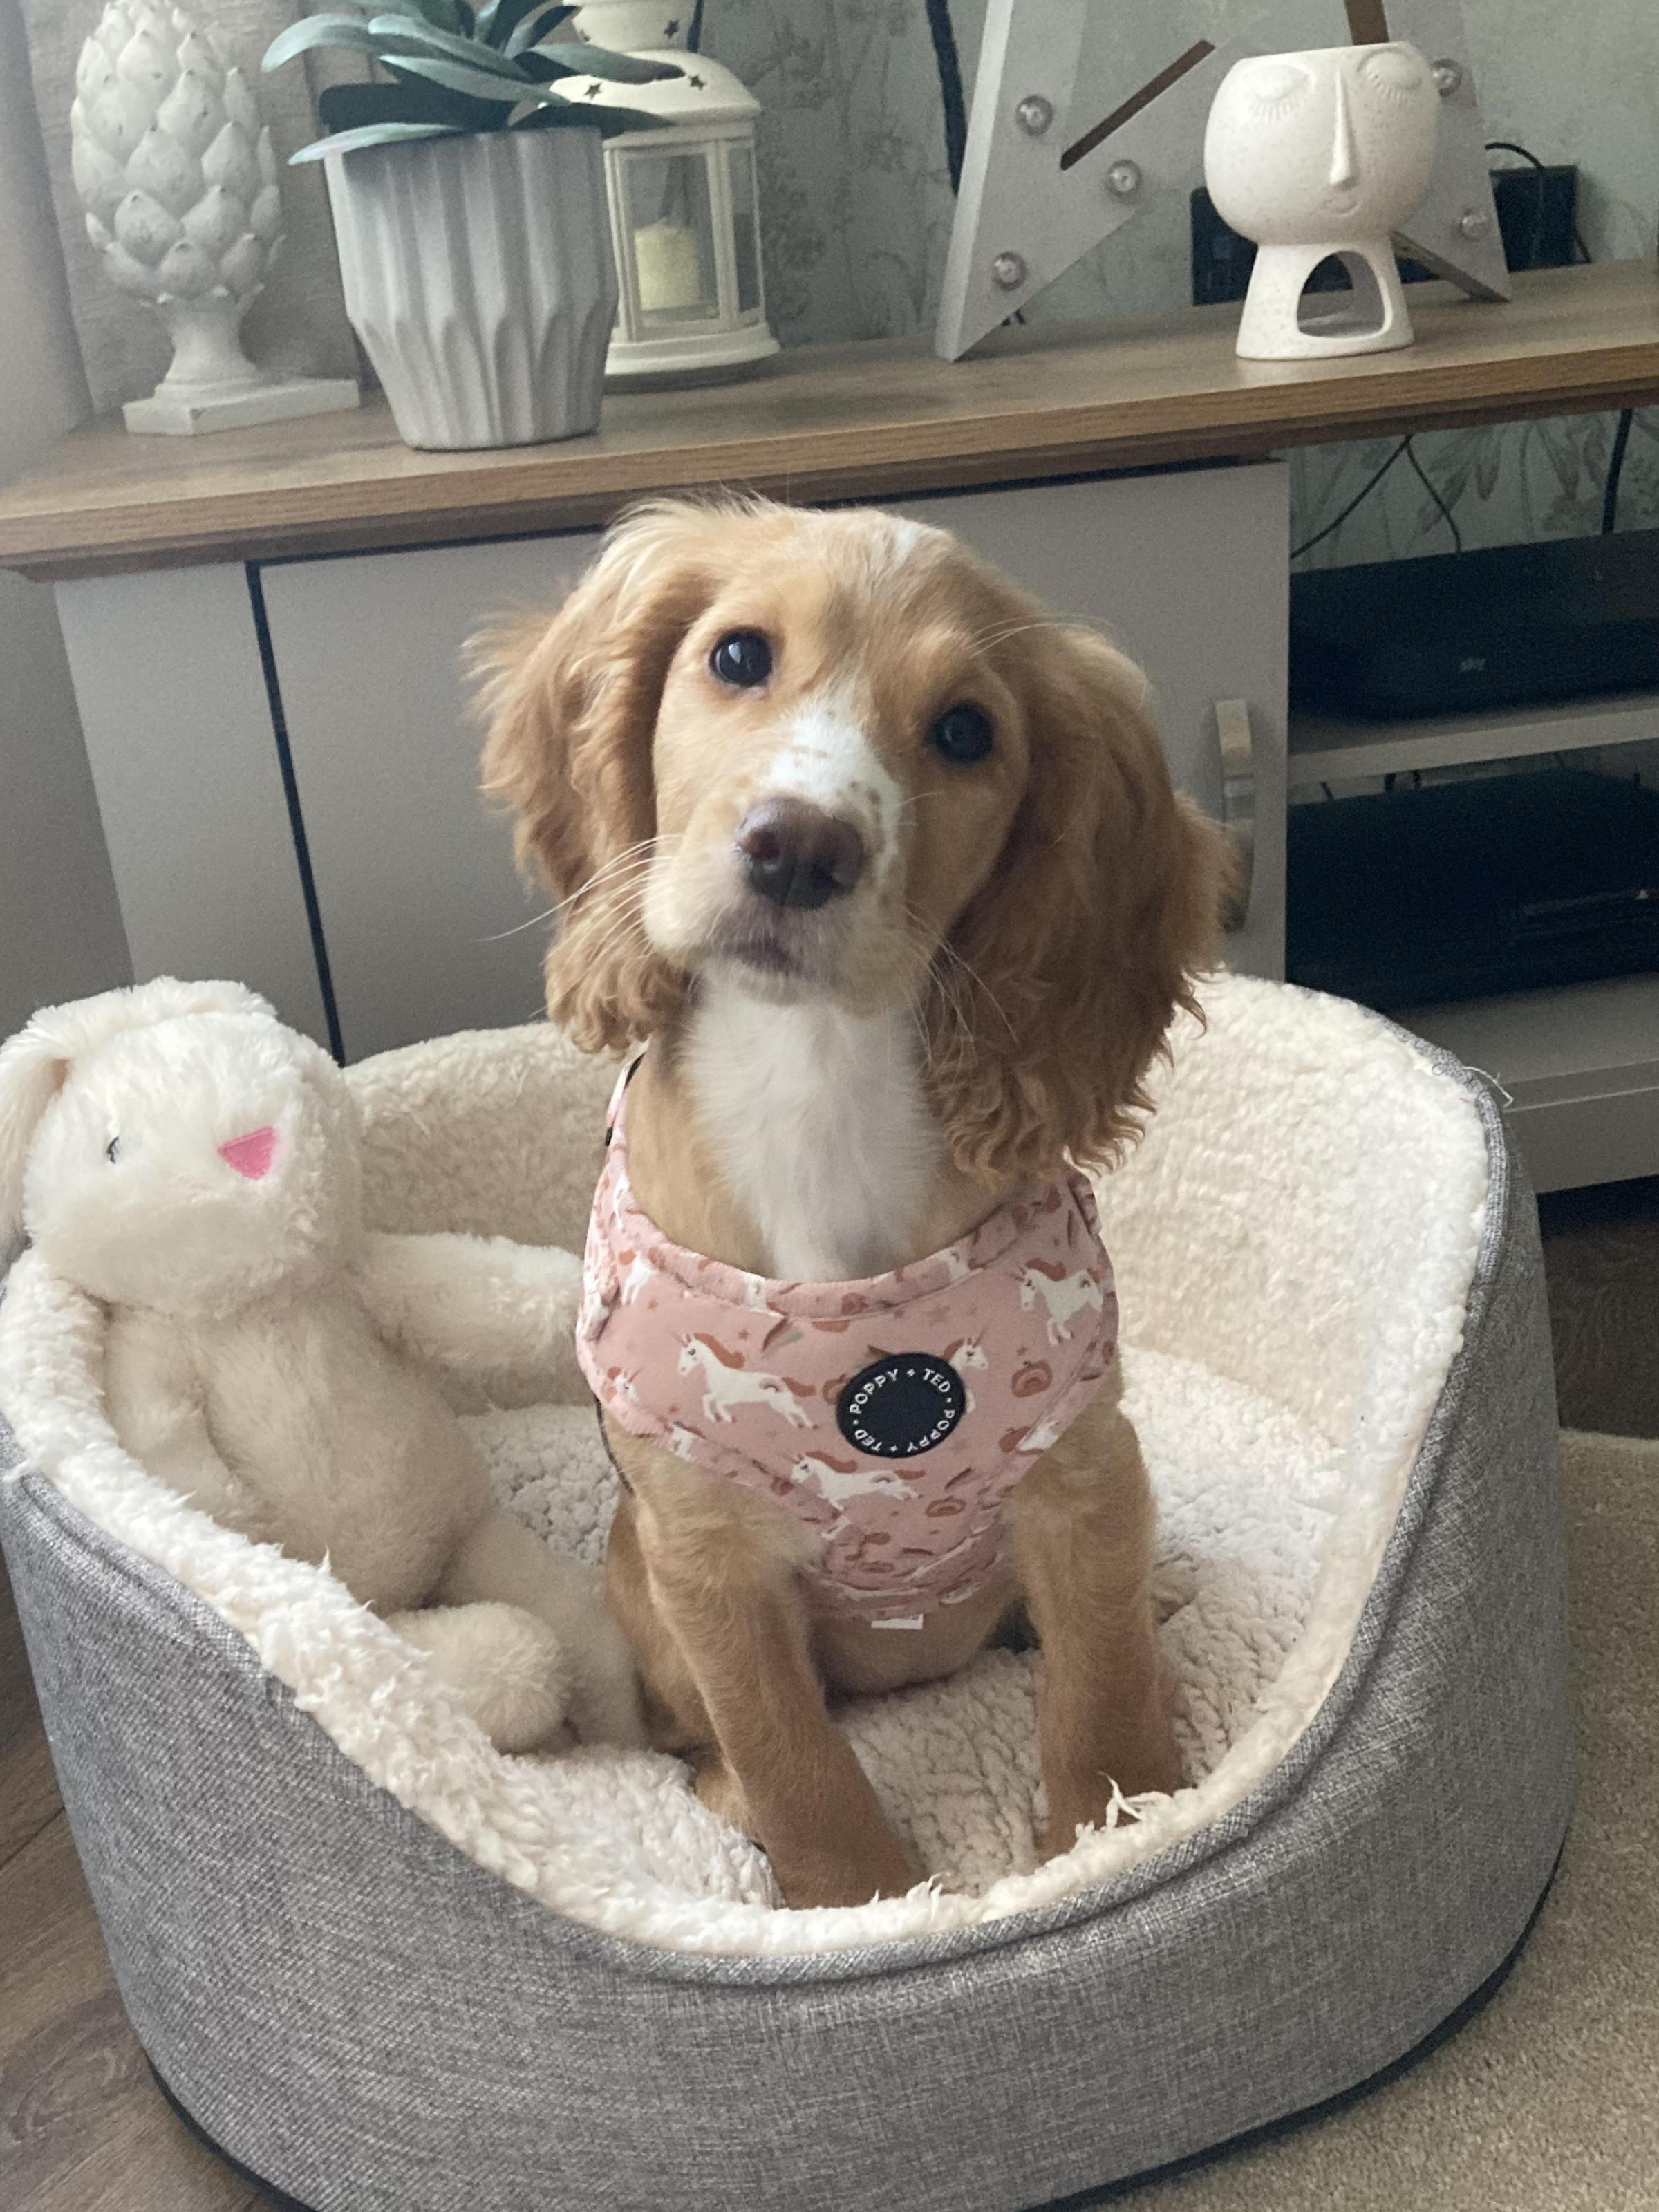 Hereford Times: Bonnie - 4 months old